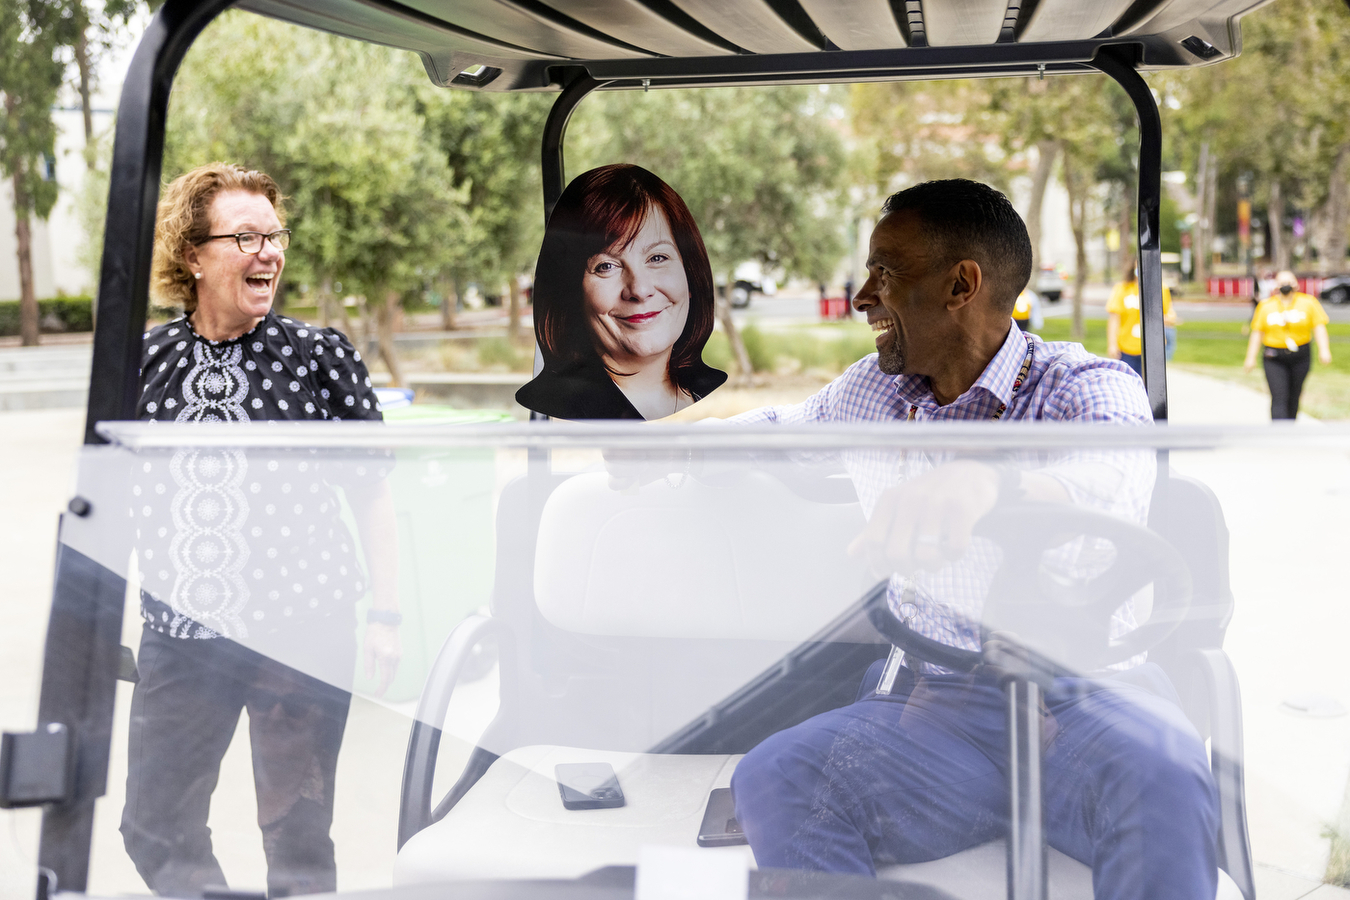 A staff member drives a golf cart, smiling at another staff member who looks on, walking, smiling back. Between them is a cardboard cutout of another staff member. 